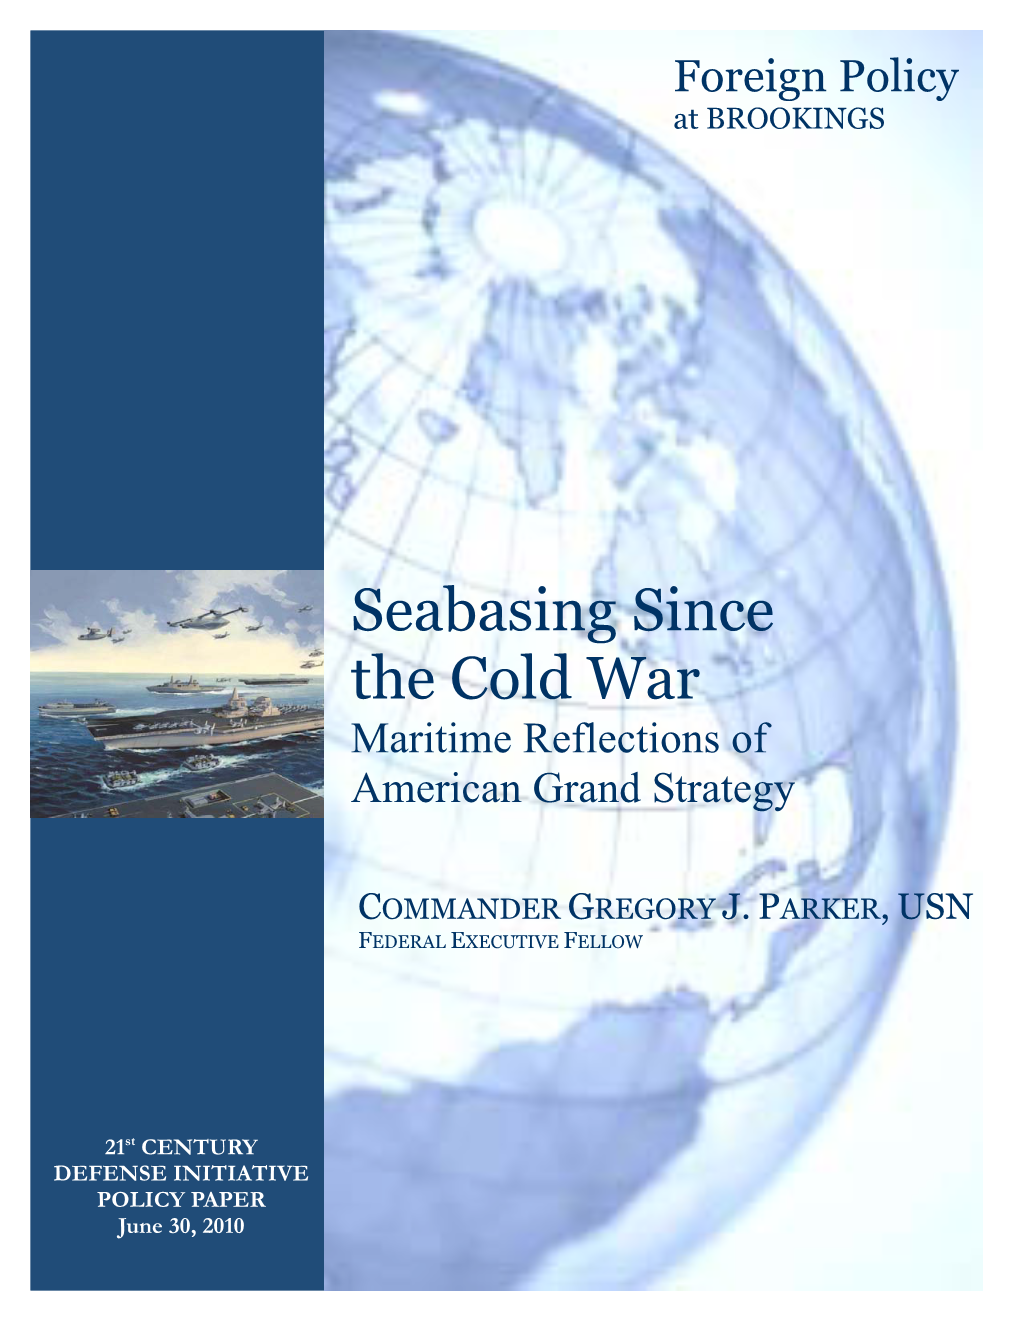 Seabasing Since the Cold War Maritime Reflections of American Grand Strategy